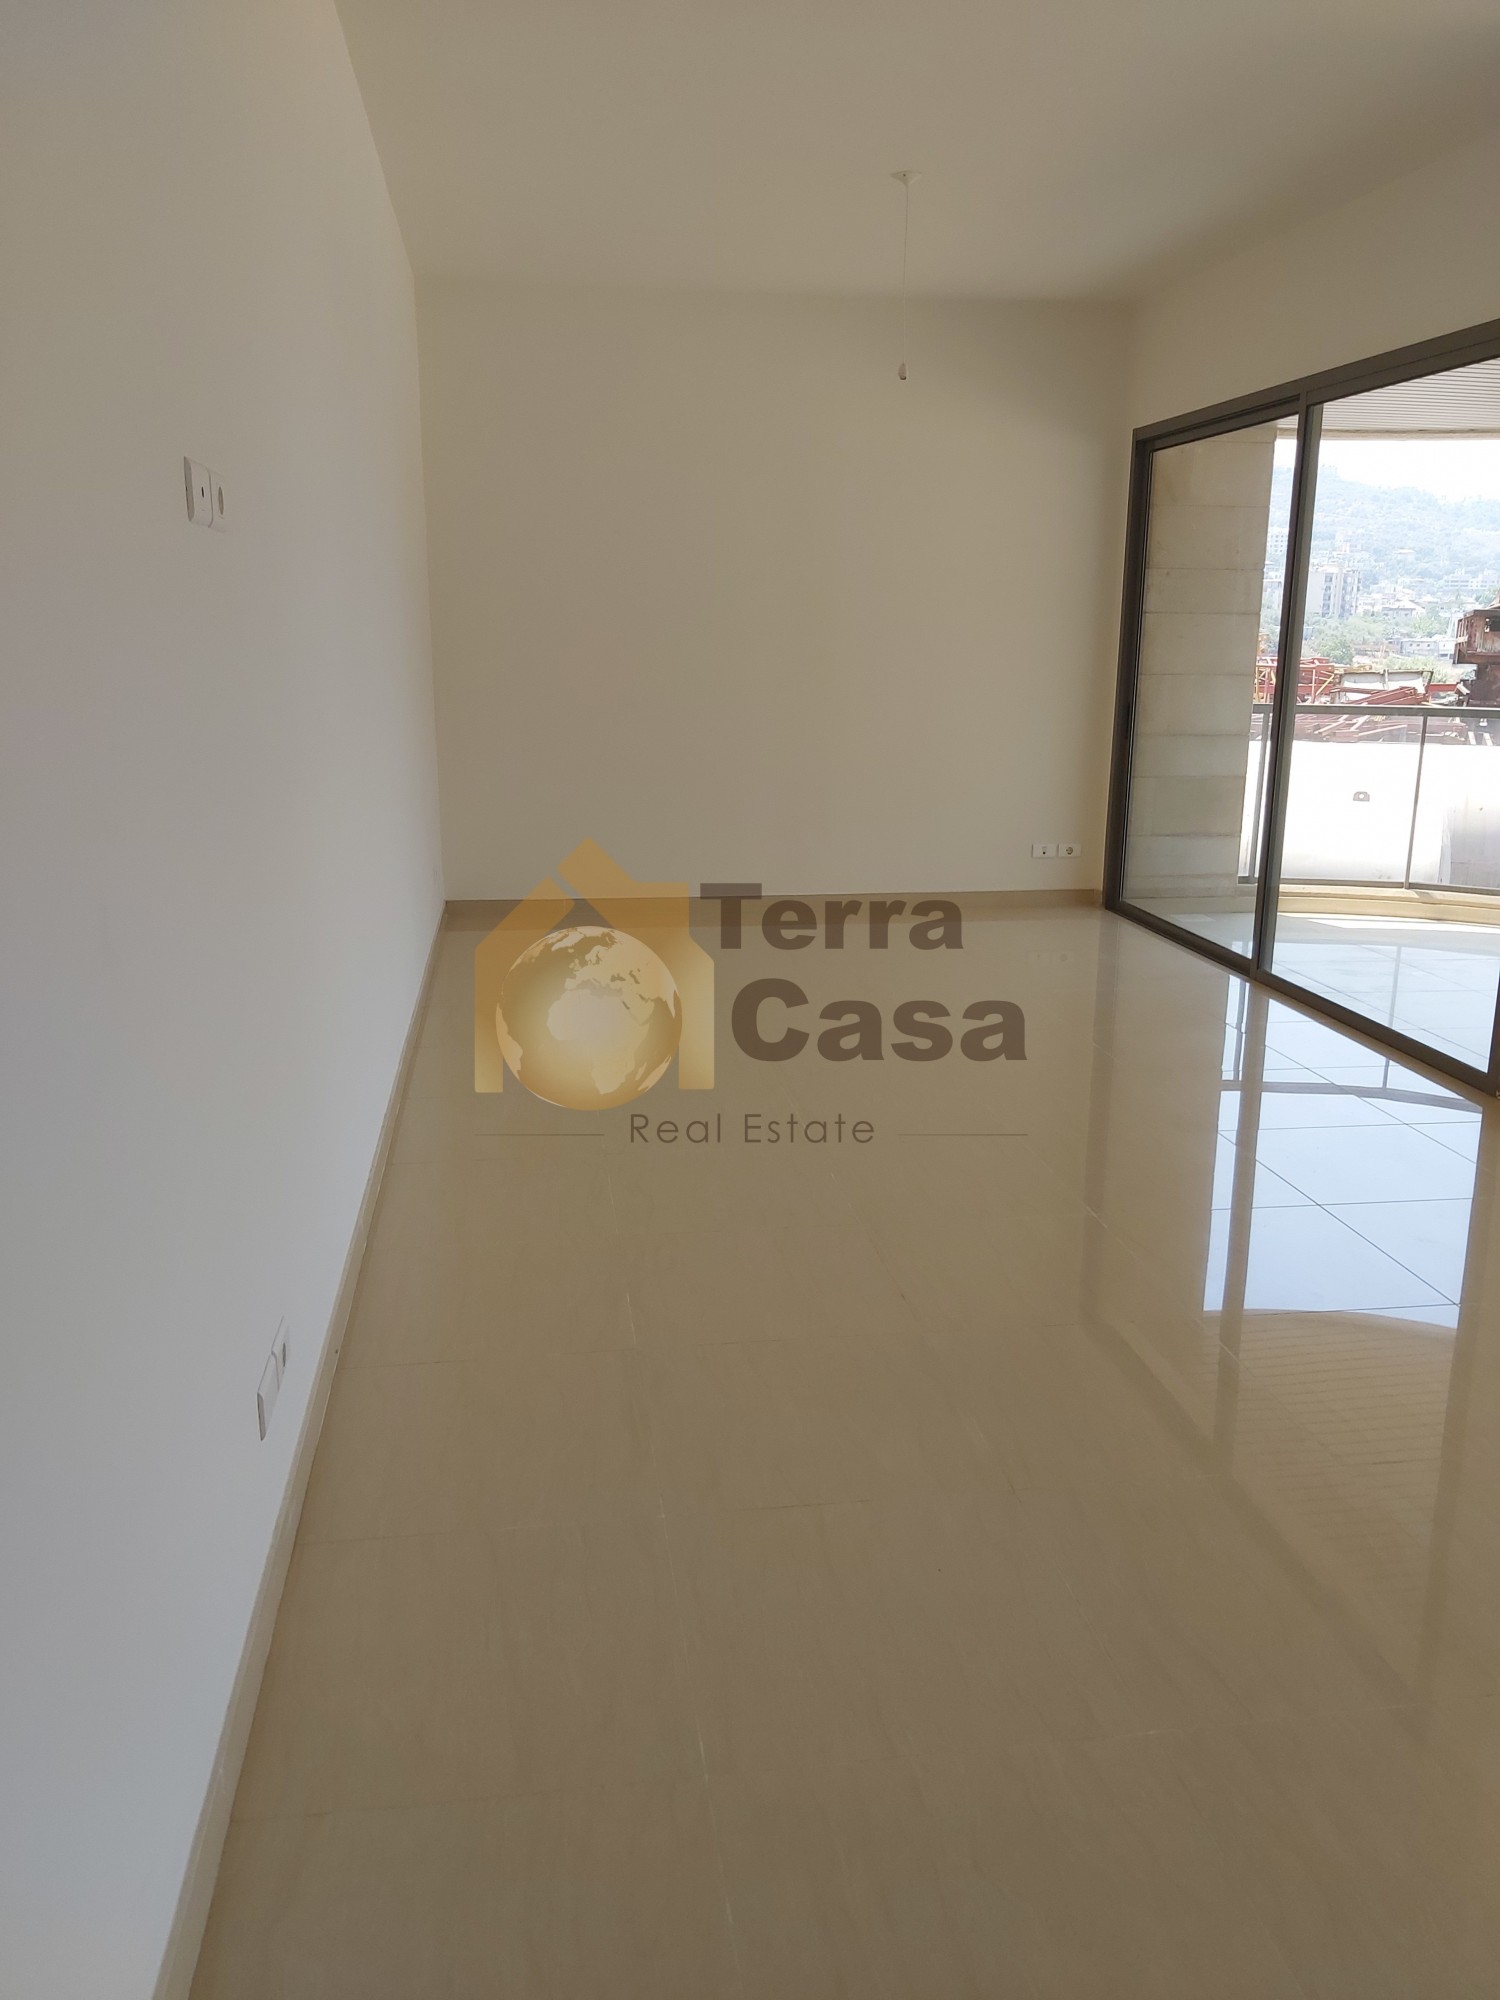 A brand new apartment located in boutchay 25% cash payment.